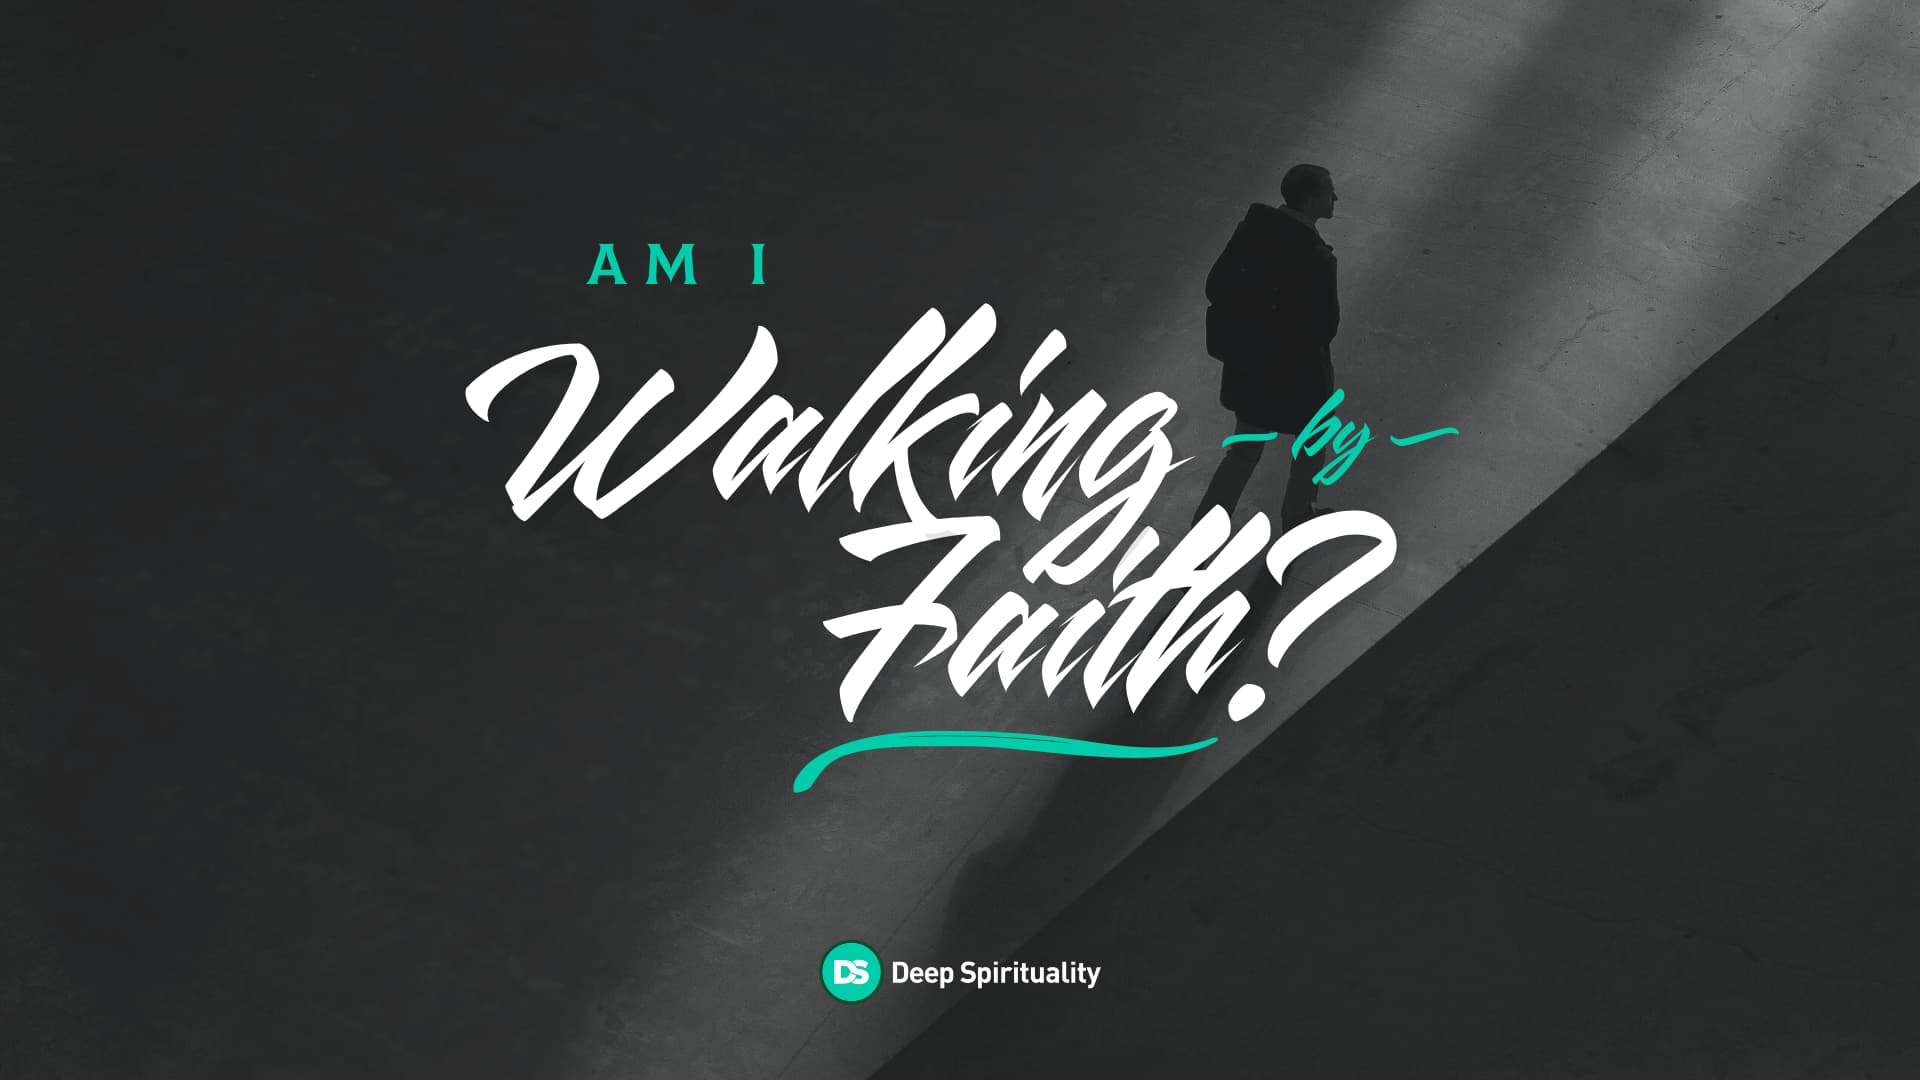 How Do I Know if I’m Walking by Faith? 7